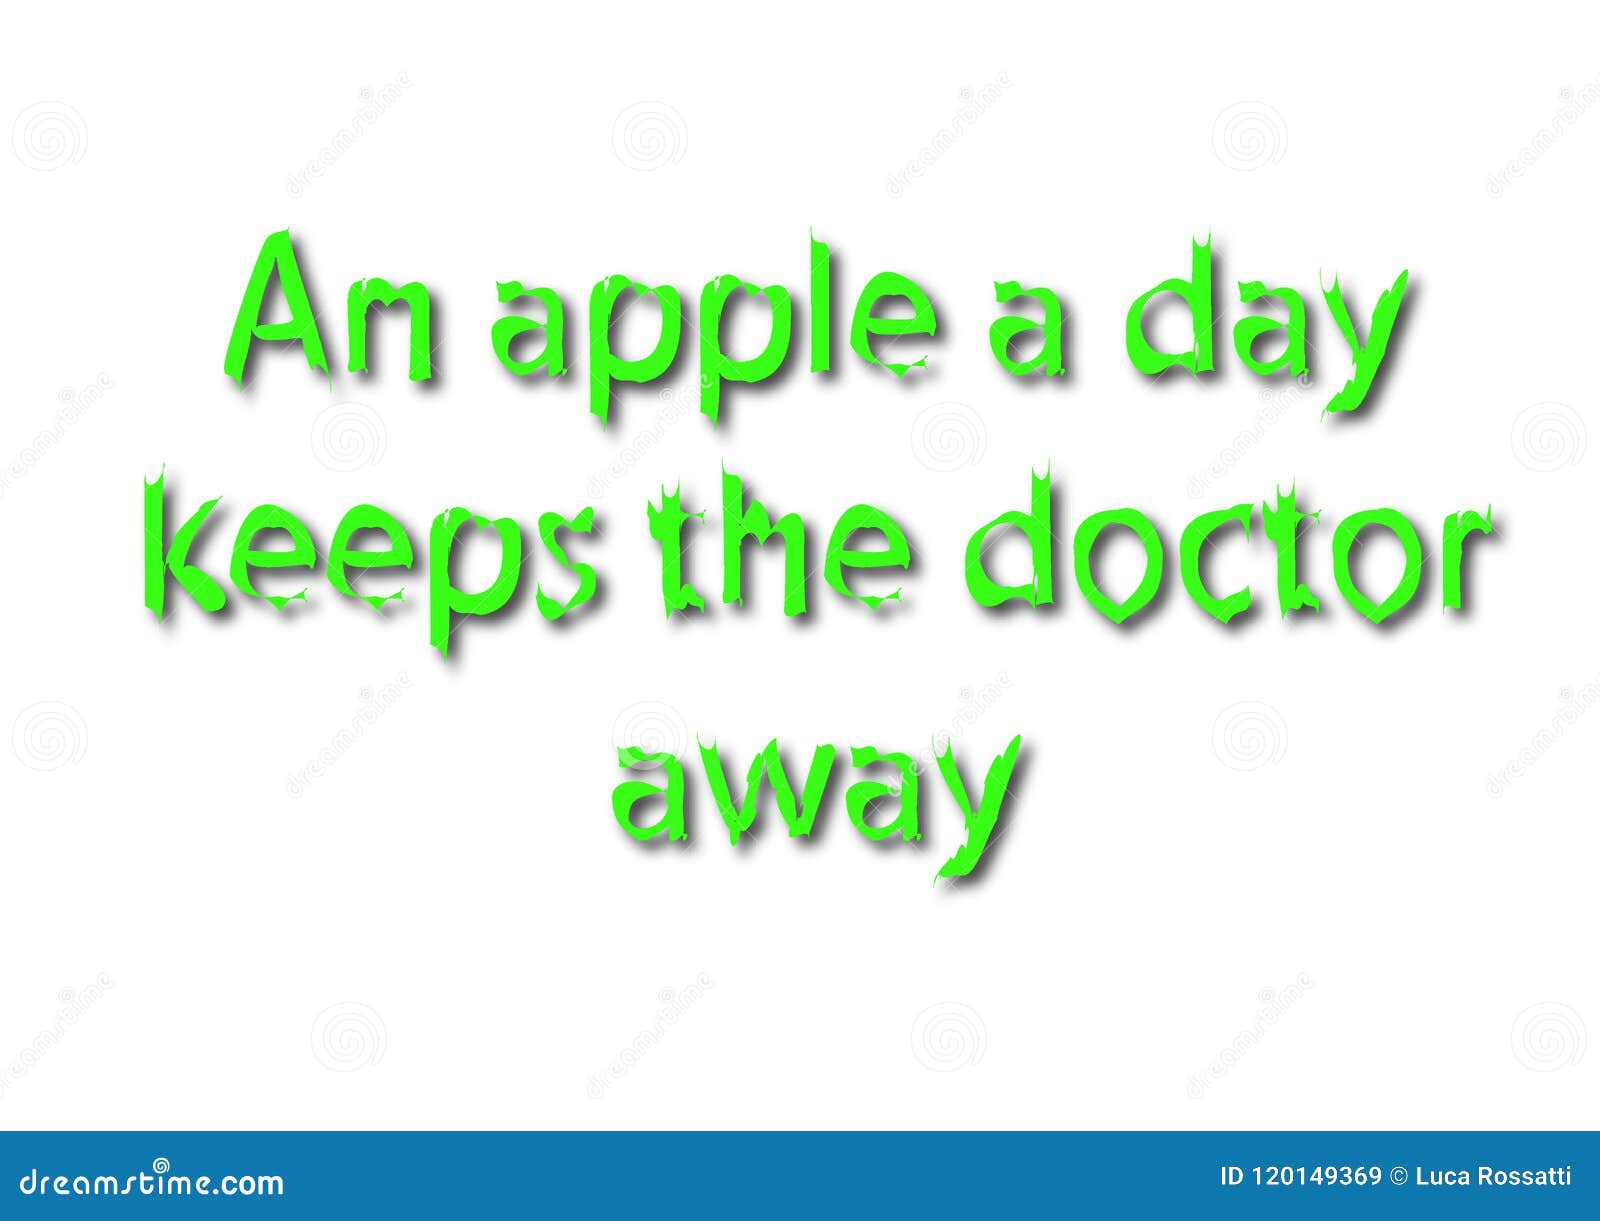 An apple a day keeps the away. An Apple a Day keeps the Doctor away перевод. An Apple a Day keeps the Doctor away идиома. One Apple a Day keeps Doctors away. An Apple a Day keeps the Doctor away картинки.